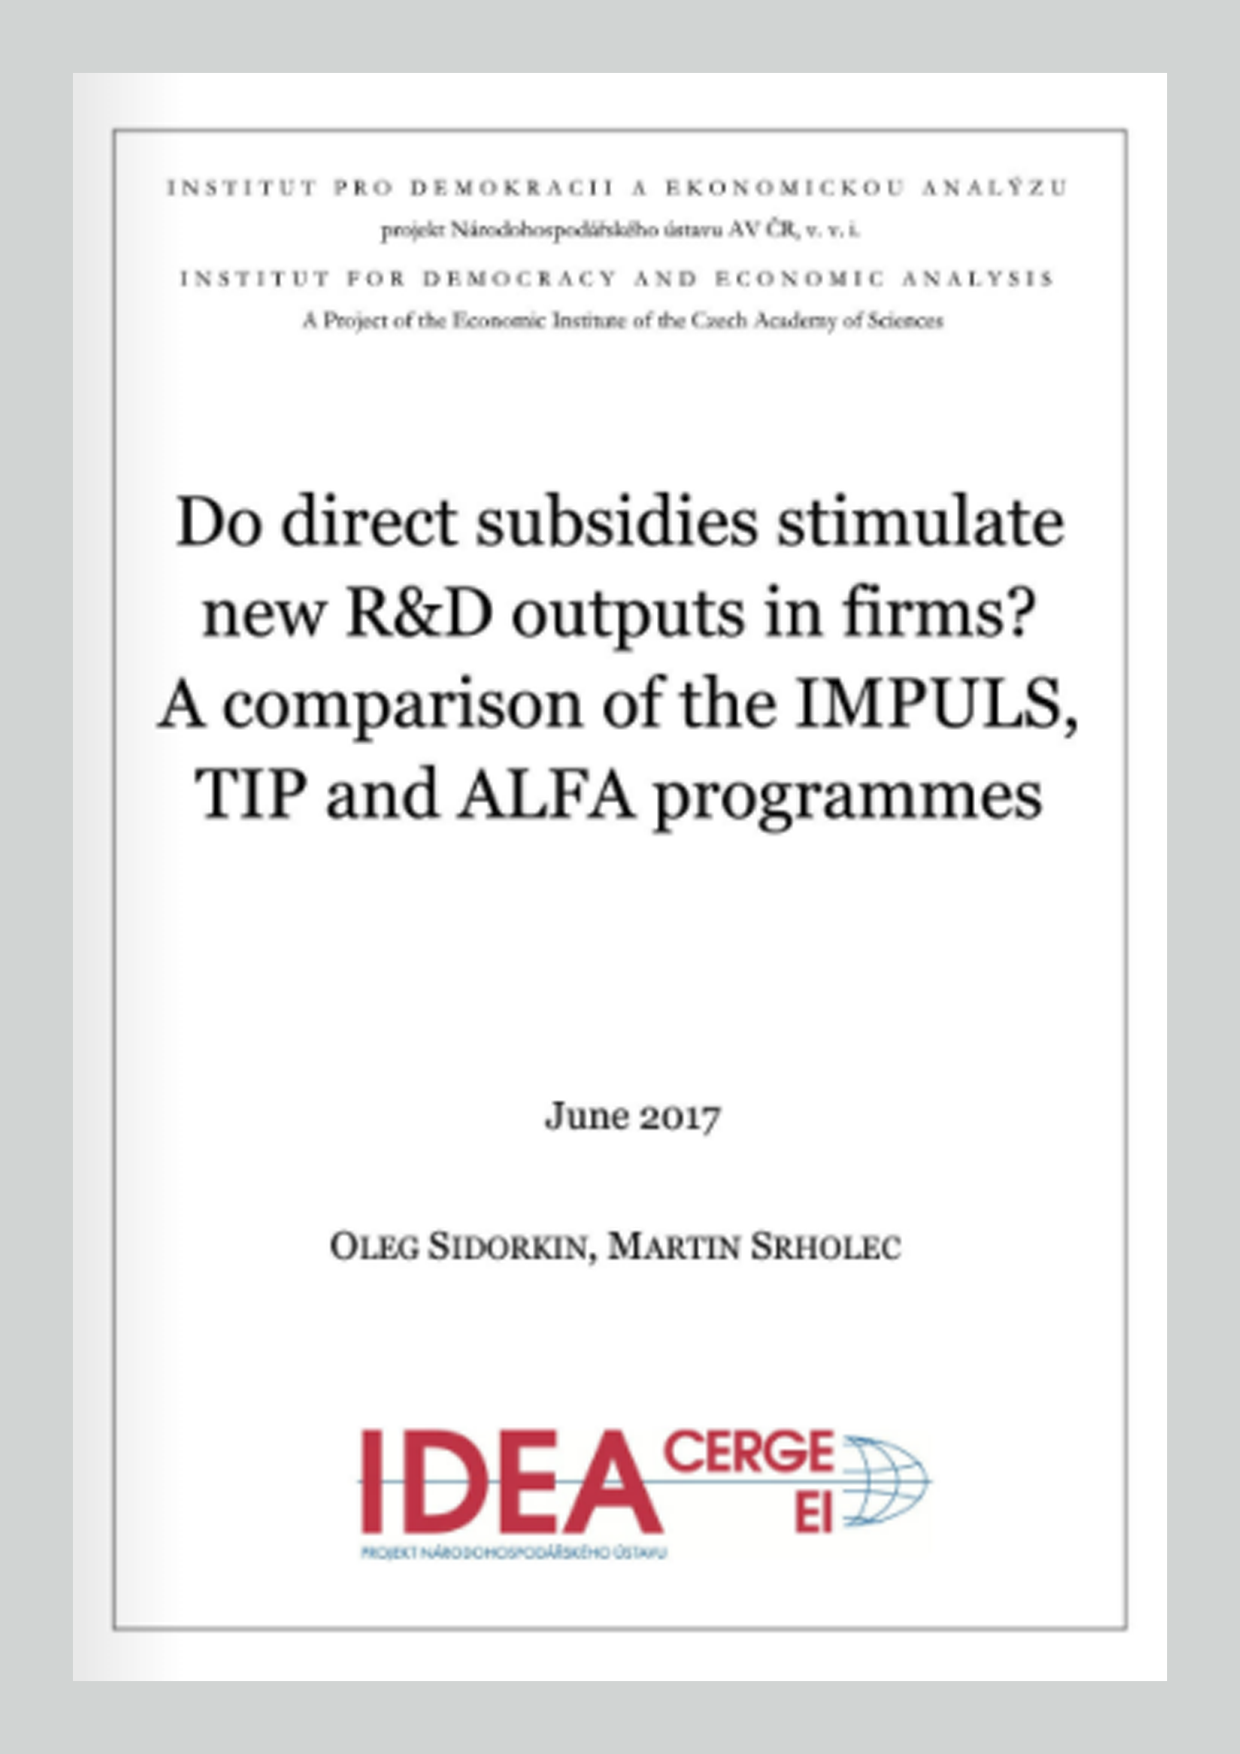 Do direct subsidies stimulate new R&D output in firms? A comparison of IMPULS, TIP and ALFA programmes